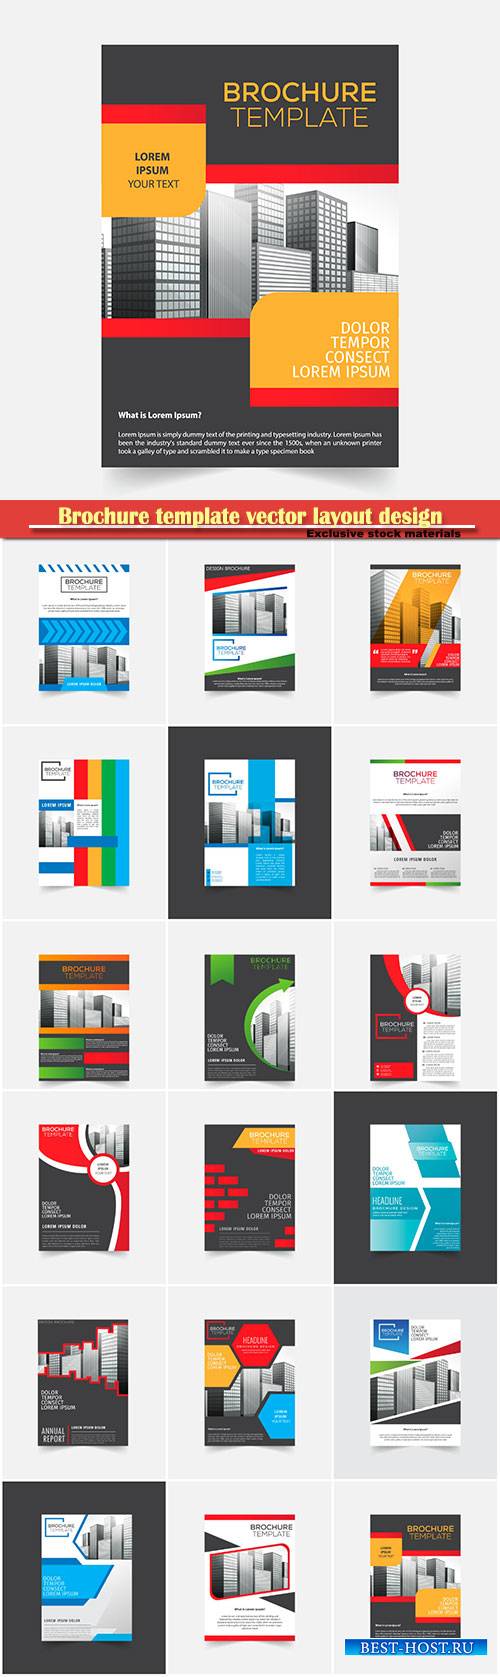 Brochure template vector layout design, corporate business annual report, magazine, flyer mockup # 107